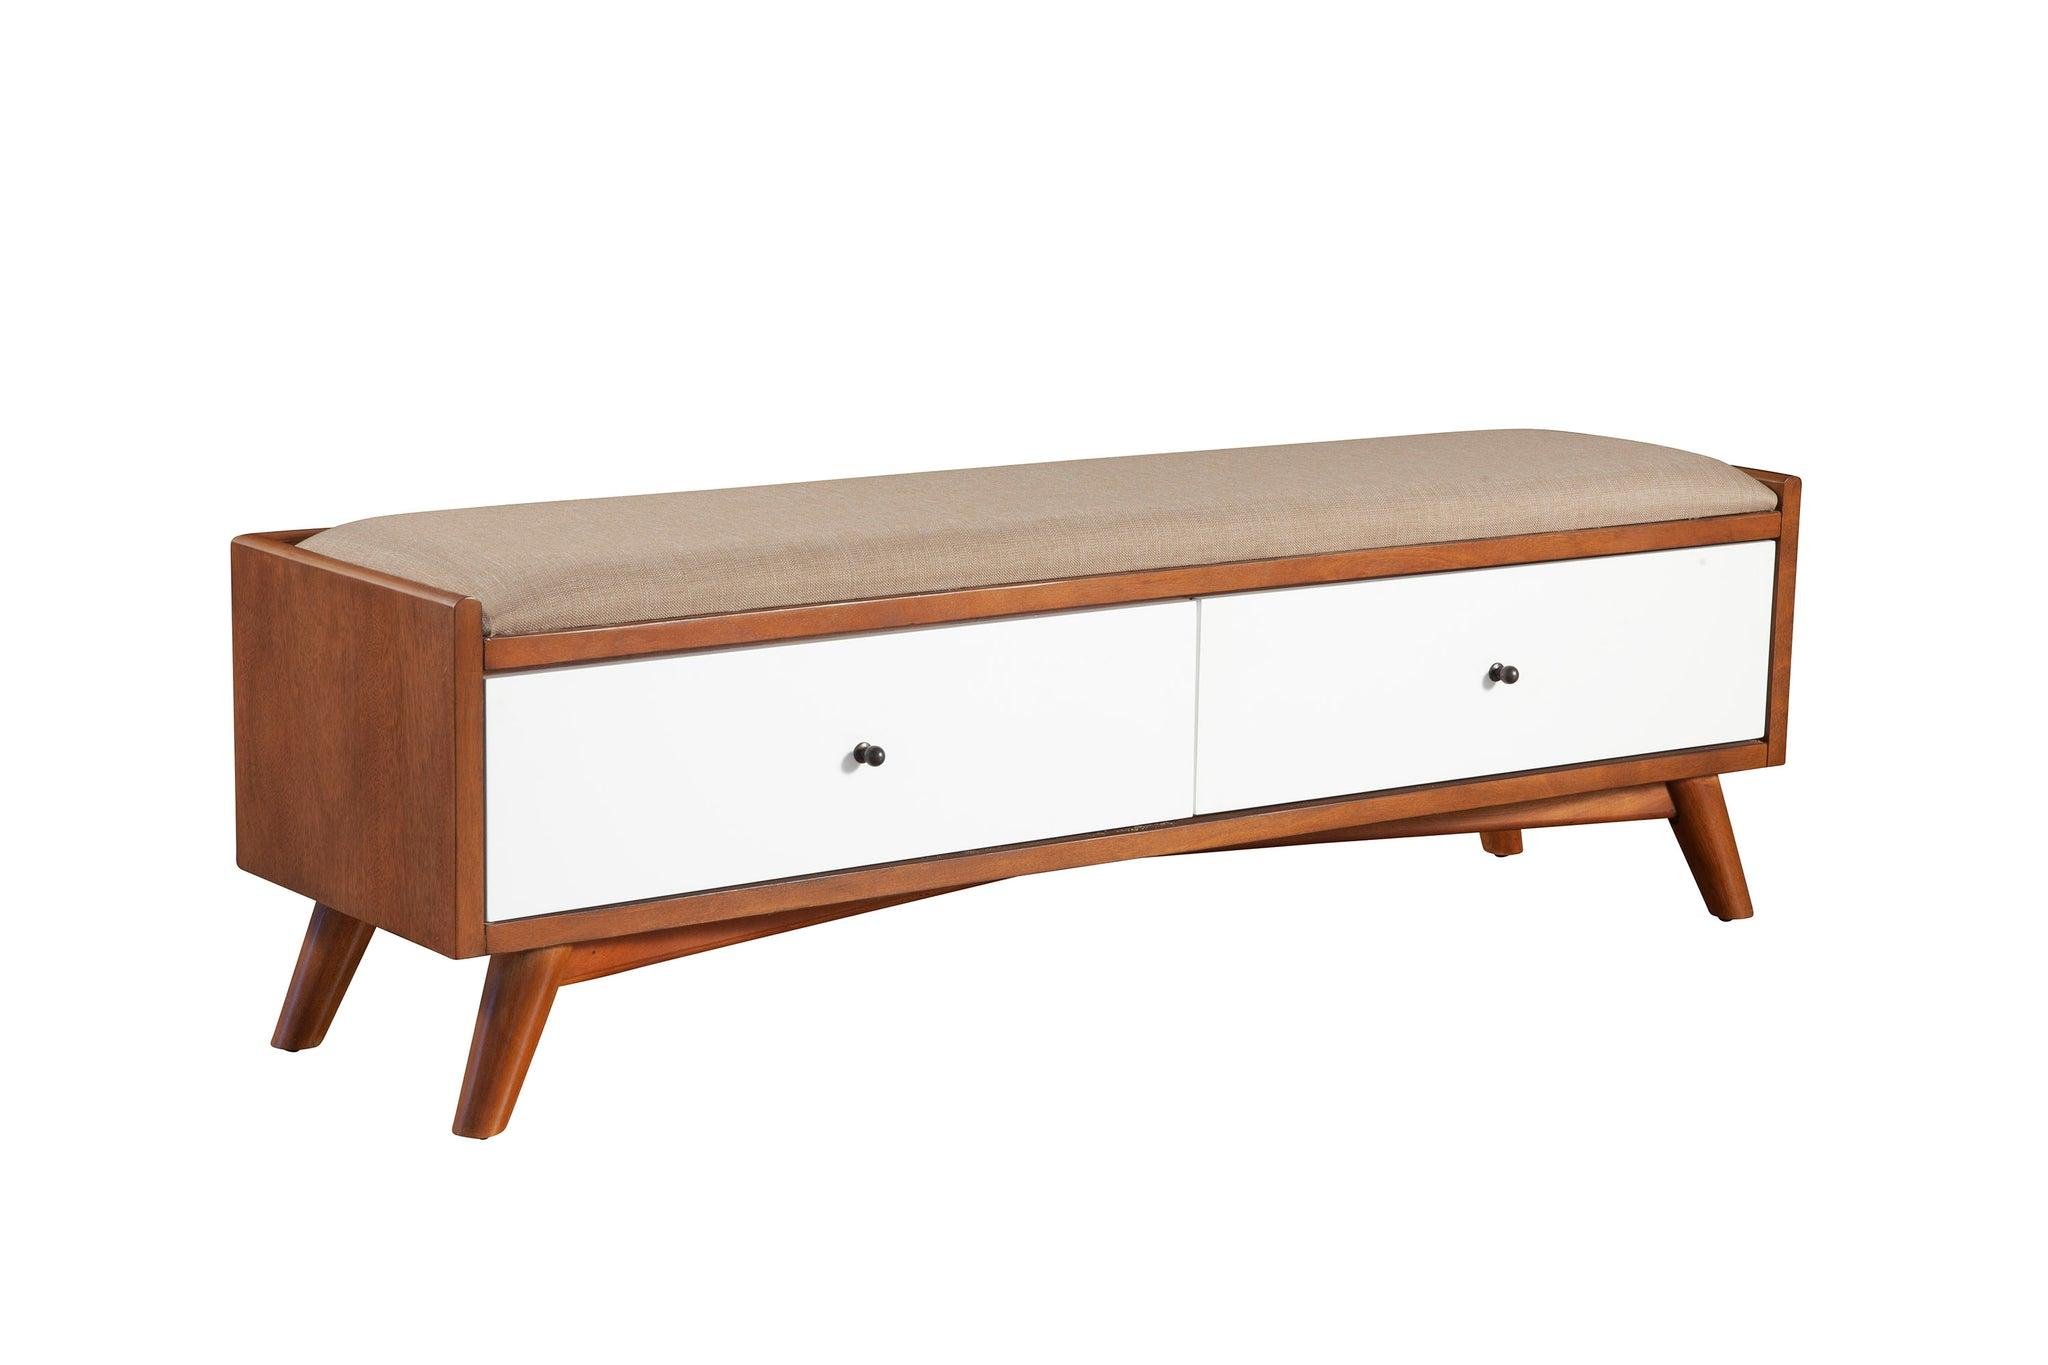 Contemporary, Modern Bench Flynn 999-12 in White, Brown Fabric